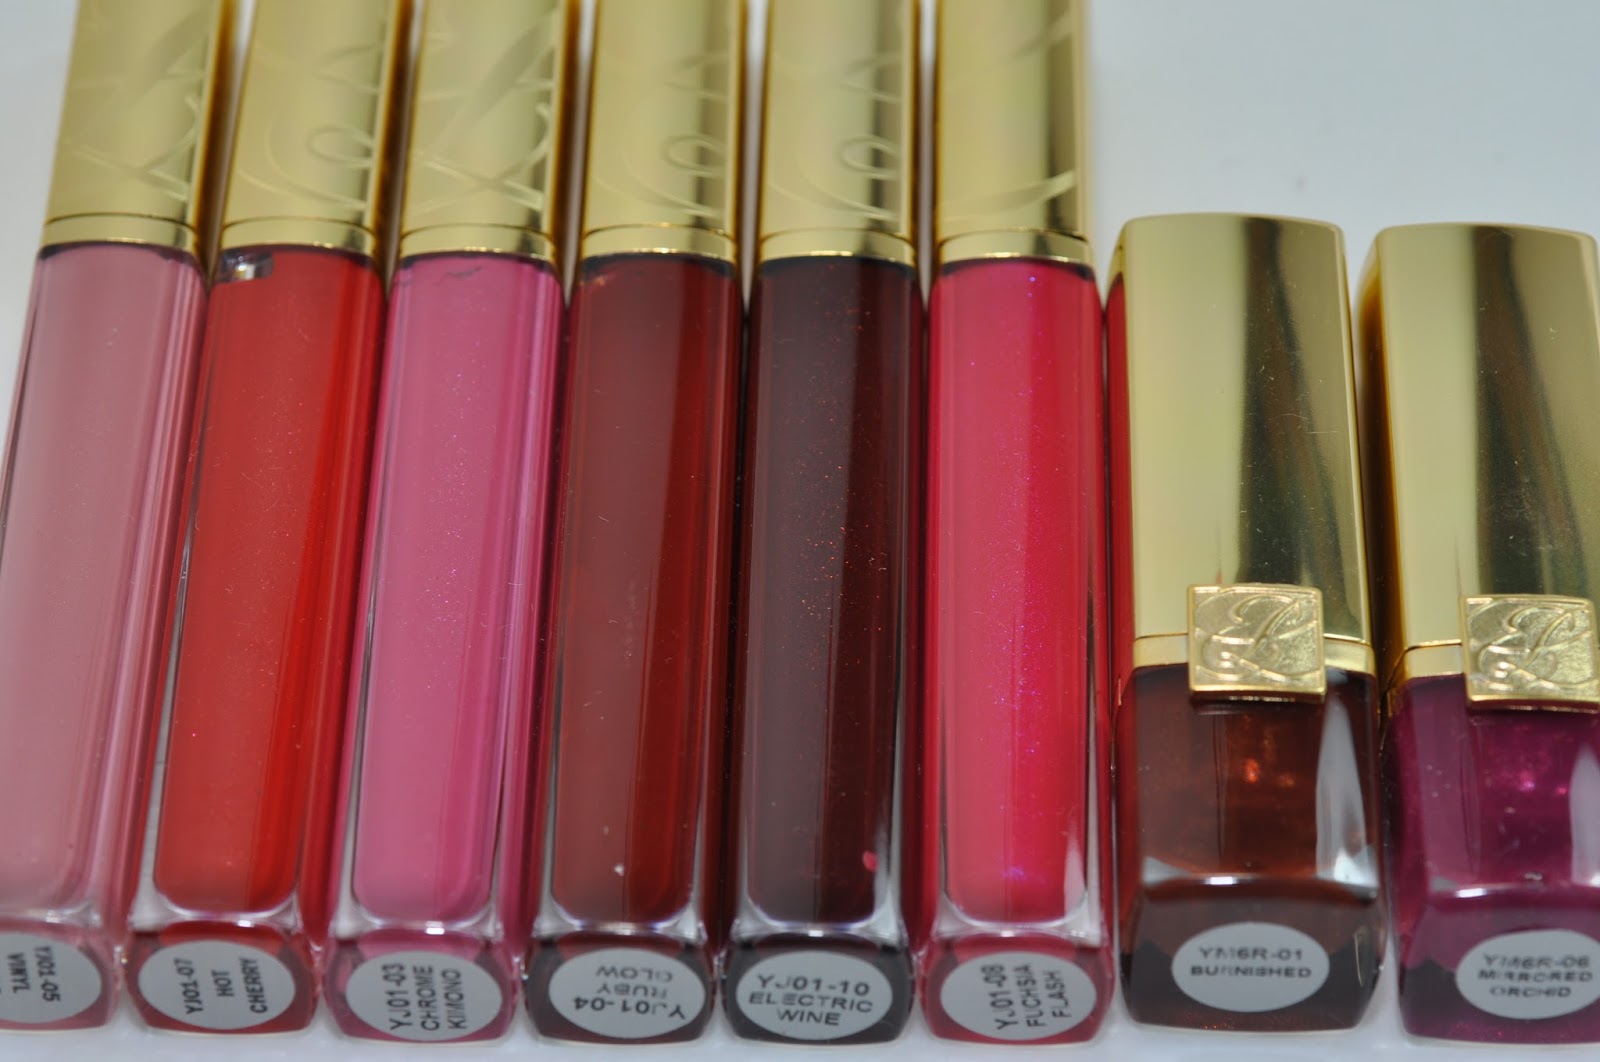 NEW Estee Lauder Pure Color High Intensity Lip Lacquer Swatches, Lip Looks,  Review - The Shades Of U